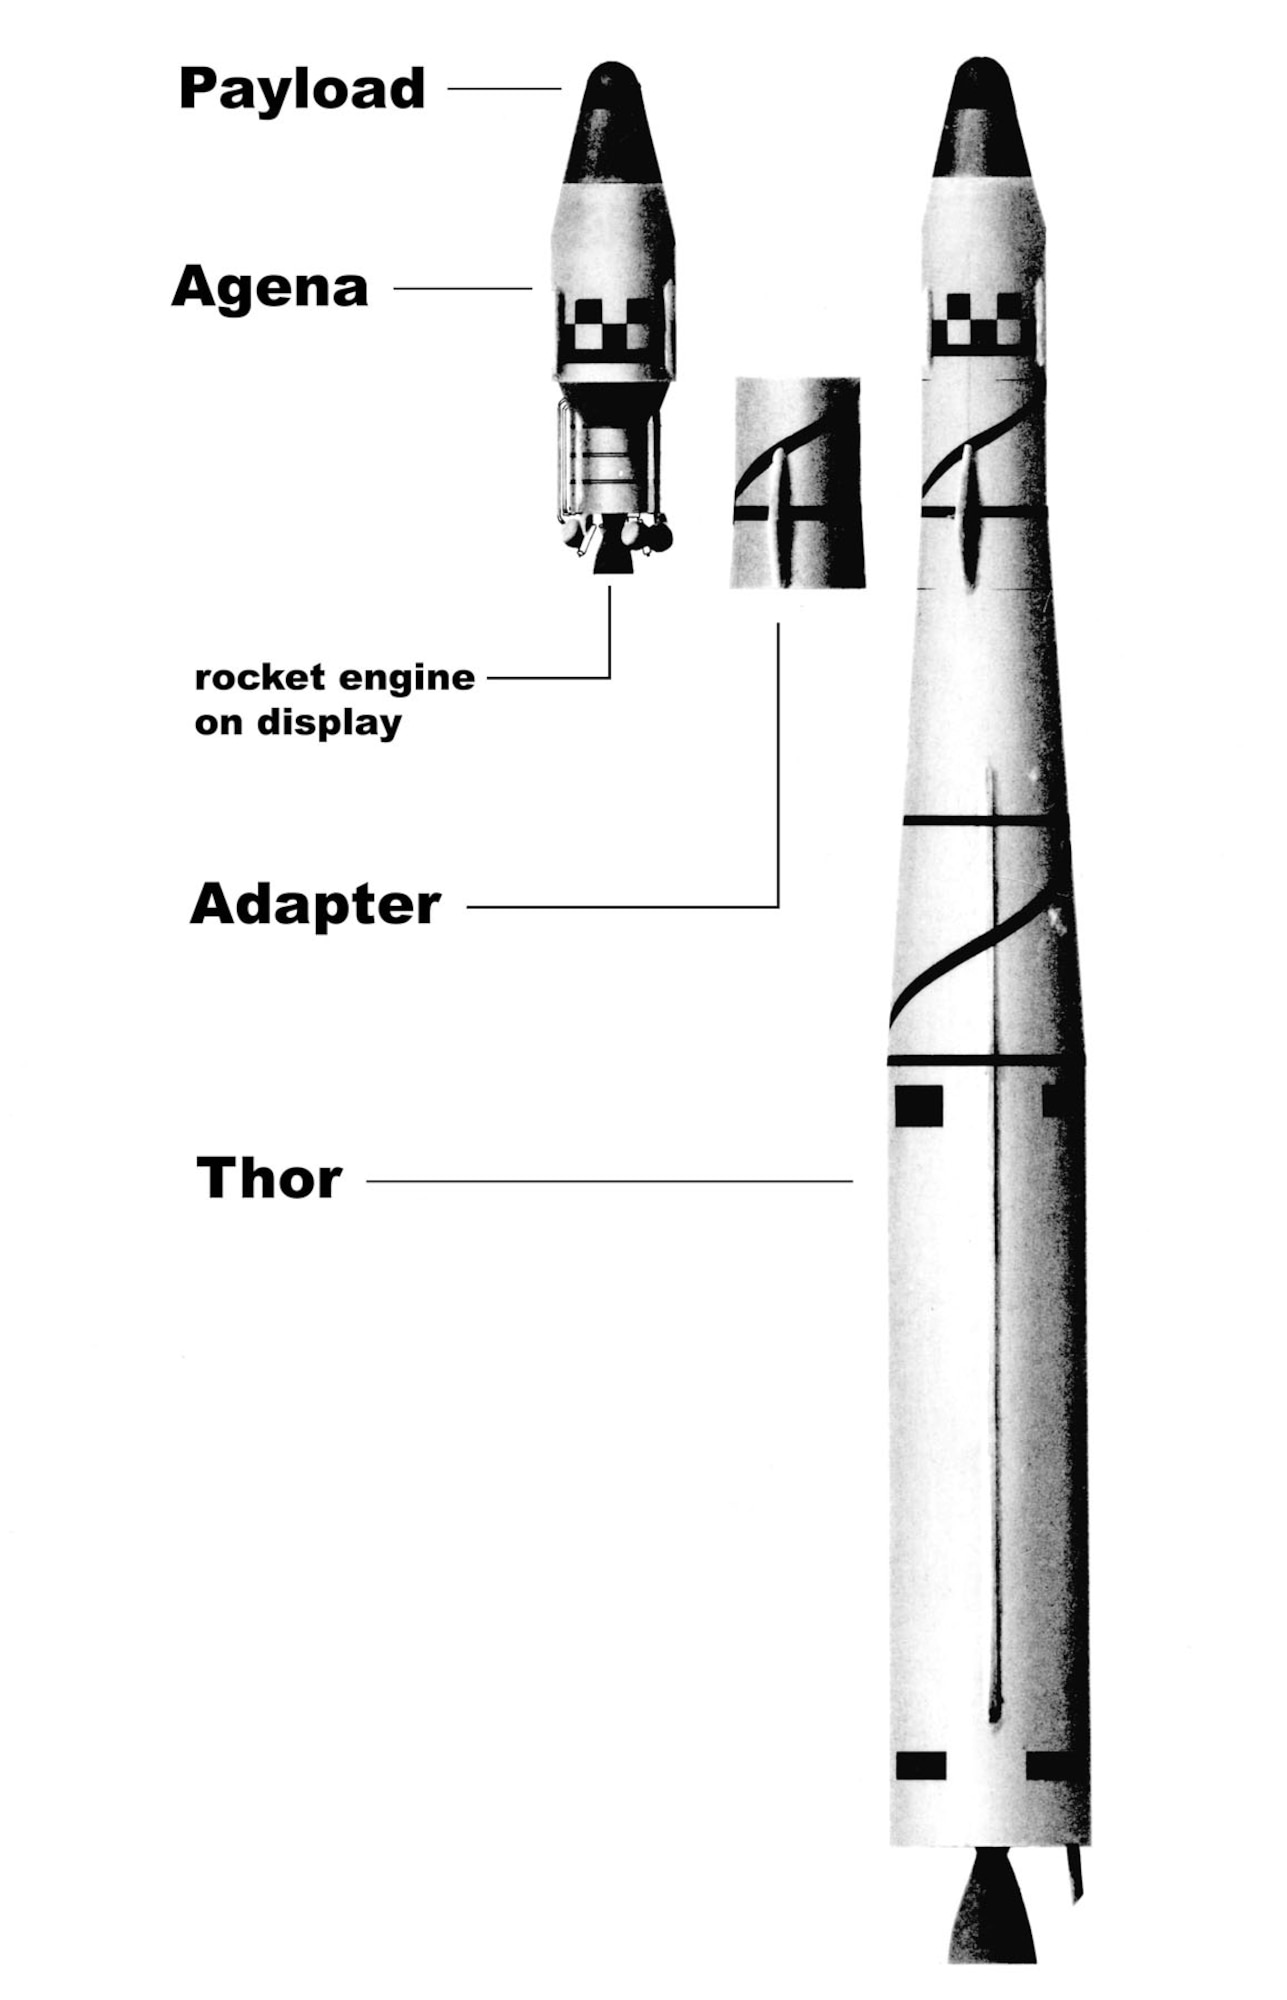 The Thor Agena A booster and upper stage combination. As an upper stage on Thor, Atlas and Titan rockets, Agena made early Air Force satellite operations possible by providing a reliable and versatile orbital platform.